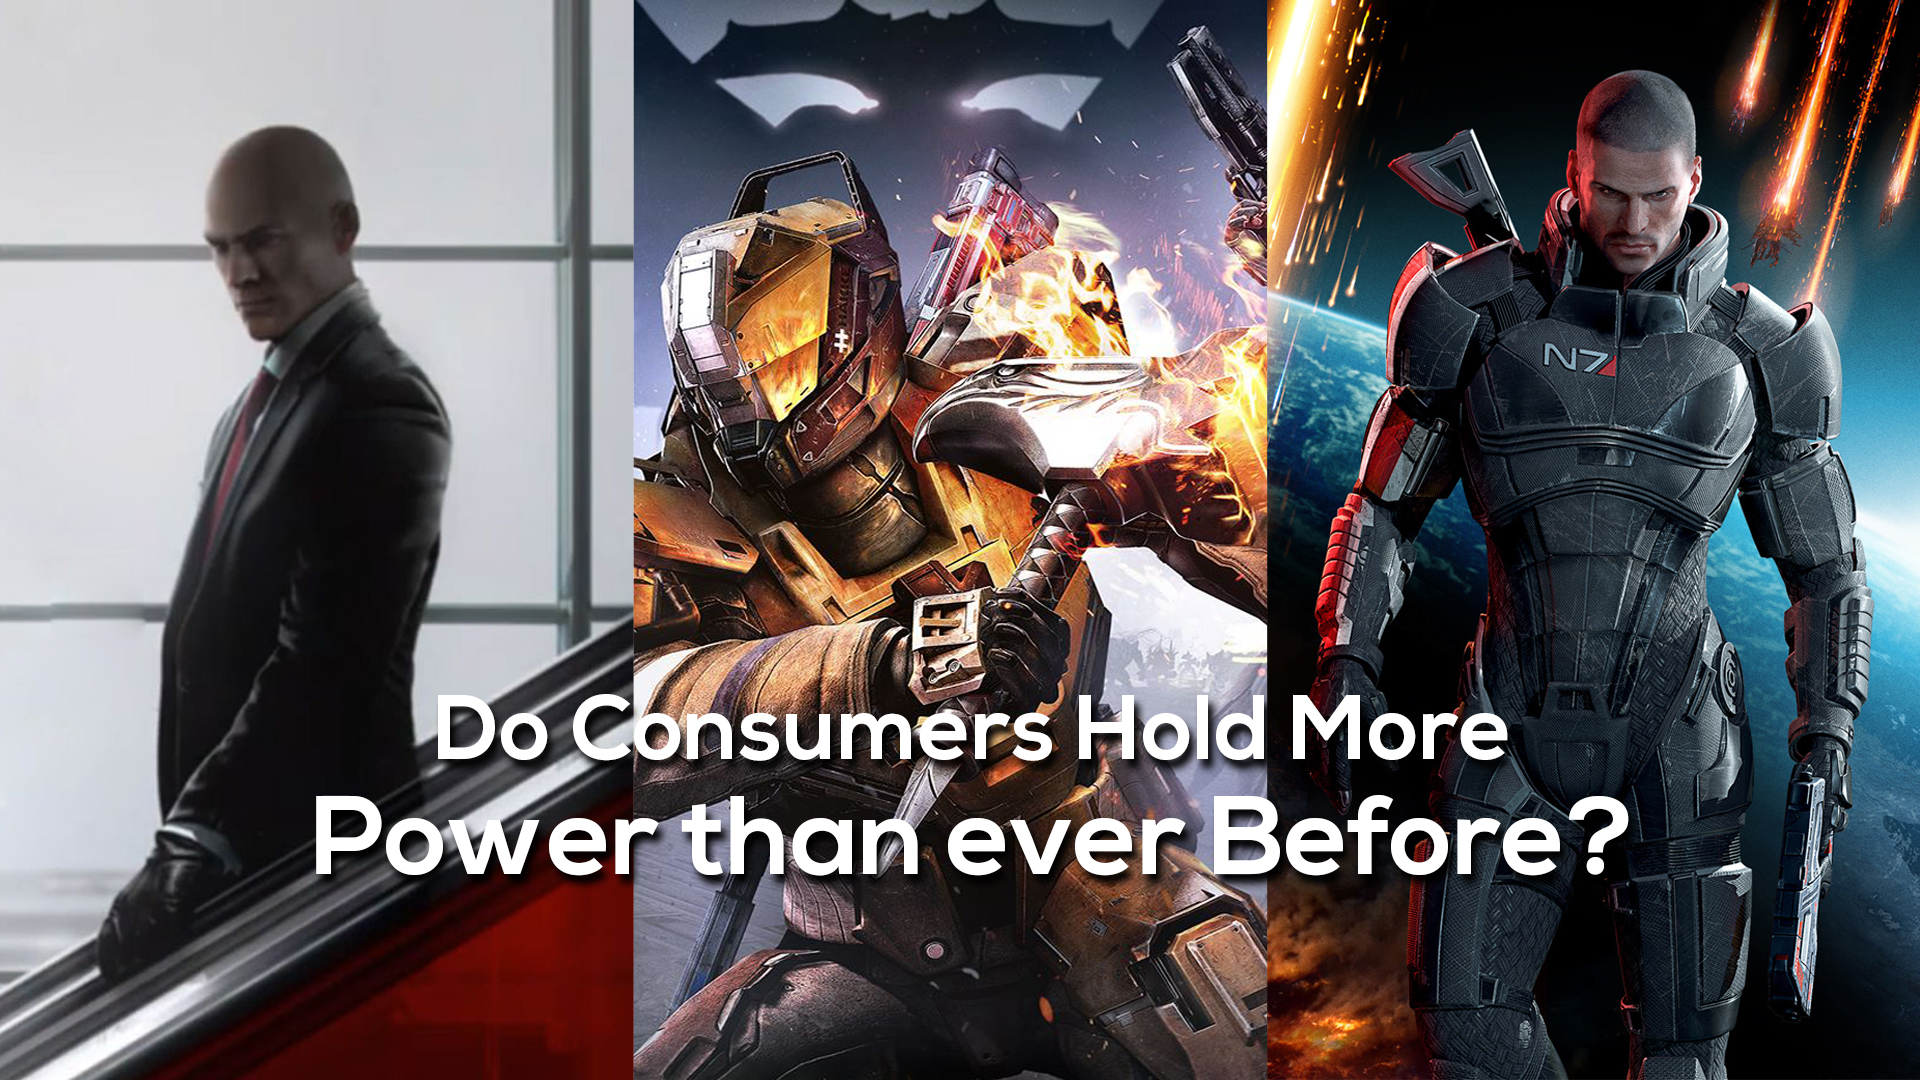 Do Consumers Hold More Power Than Ever Before in the Industry?